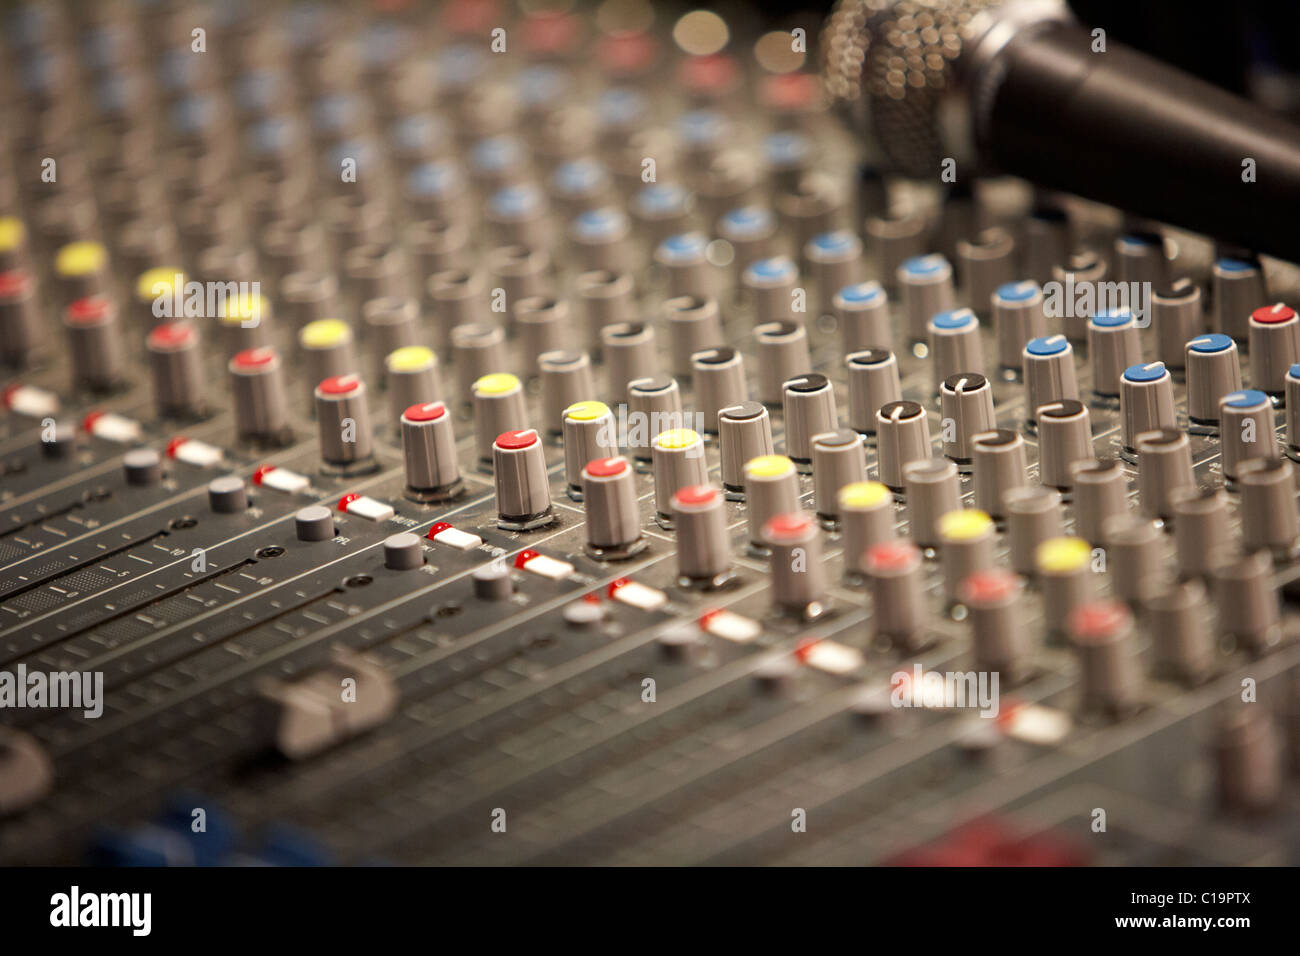 pan pots on an audio mixing desk in a theatre concert hall Stock Photo